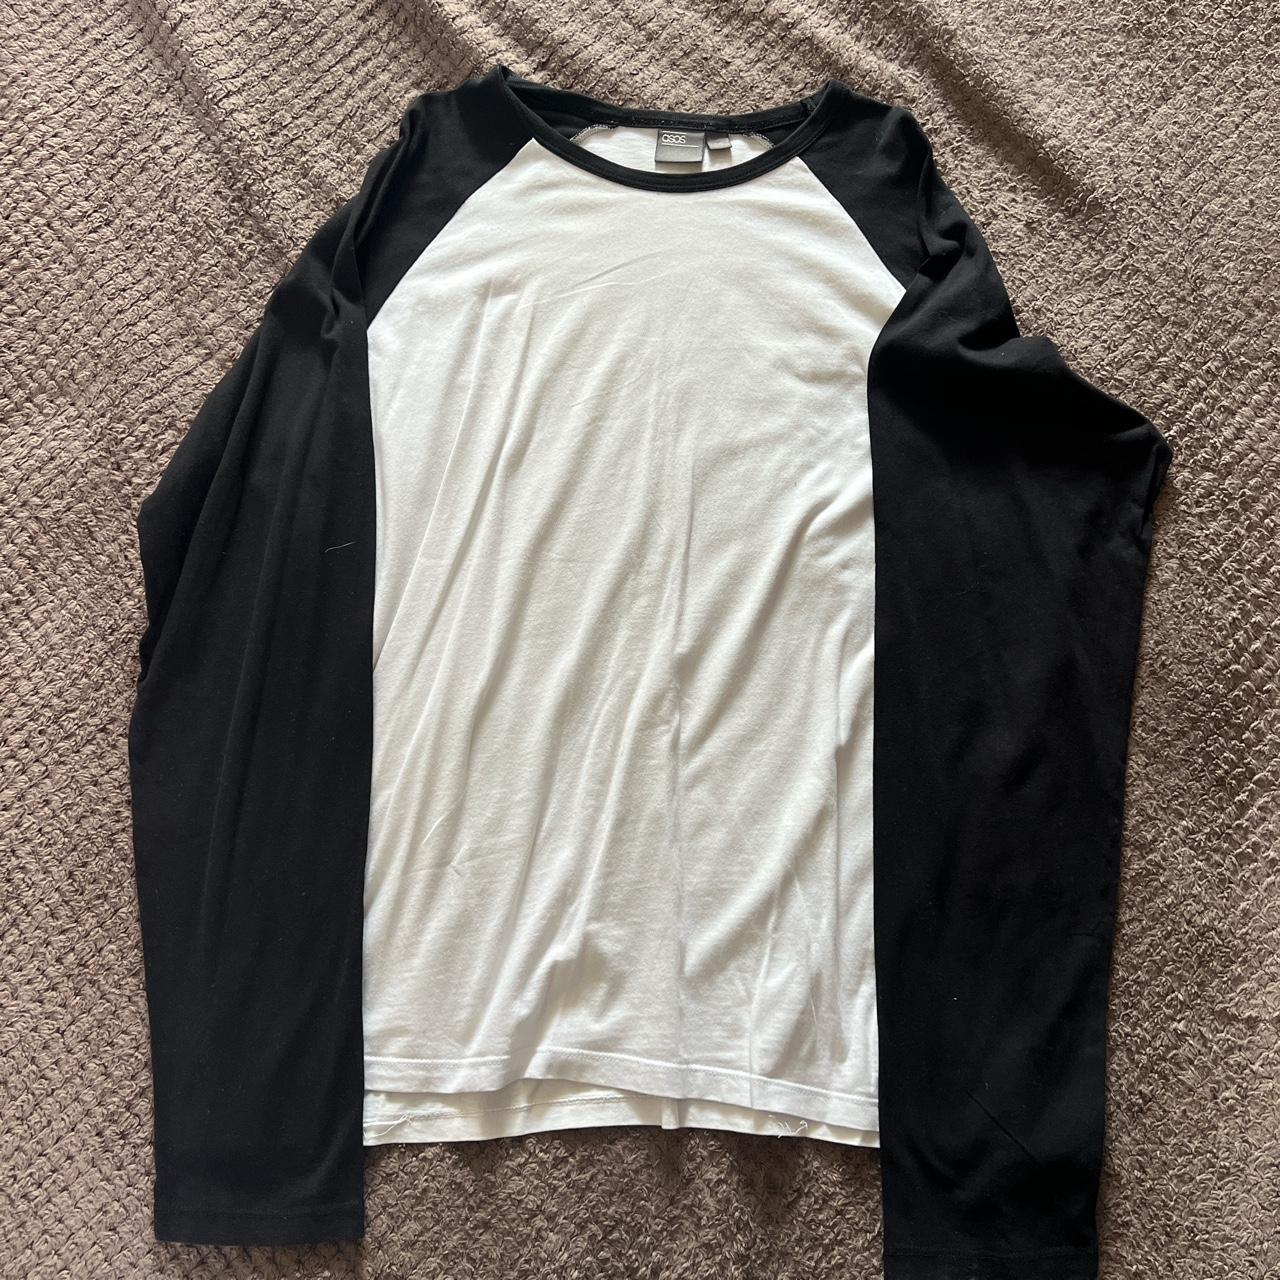 ASOS Black and White long sleeve shirt, Excellent... - Depop